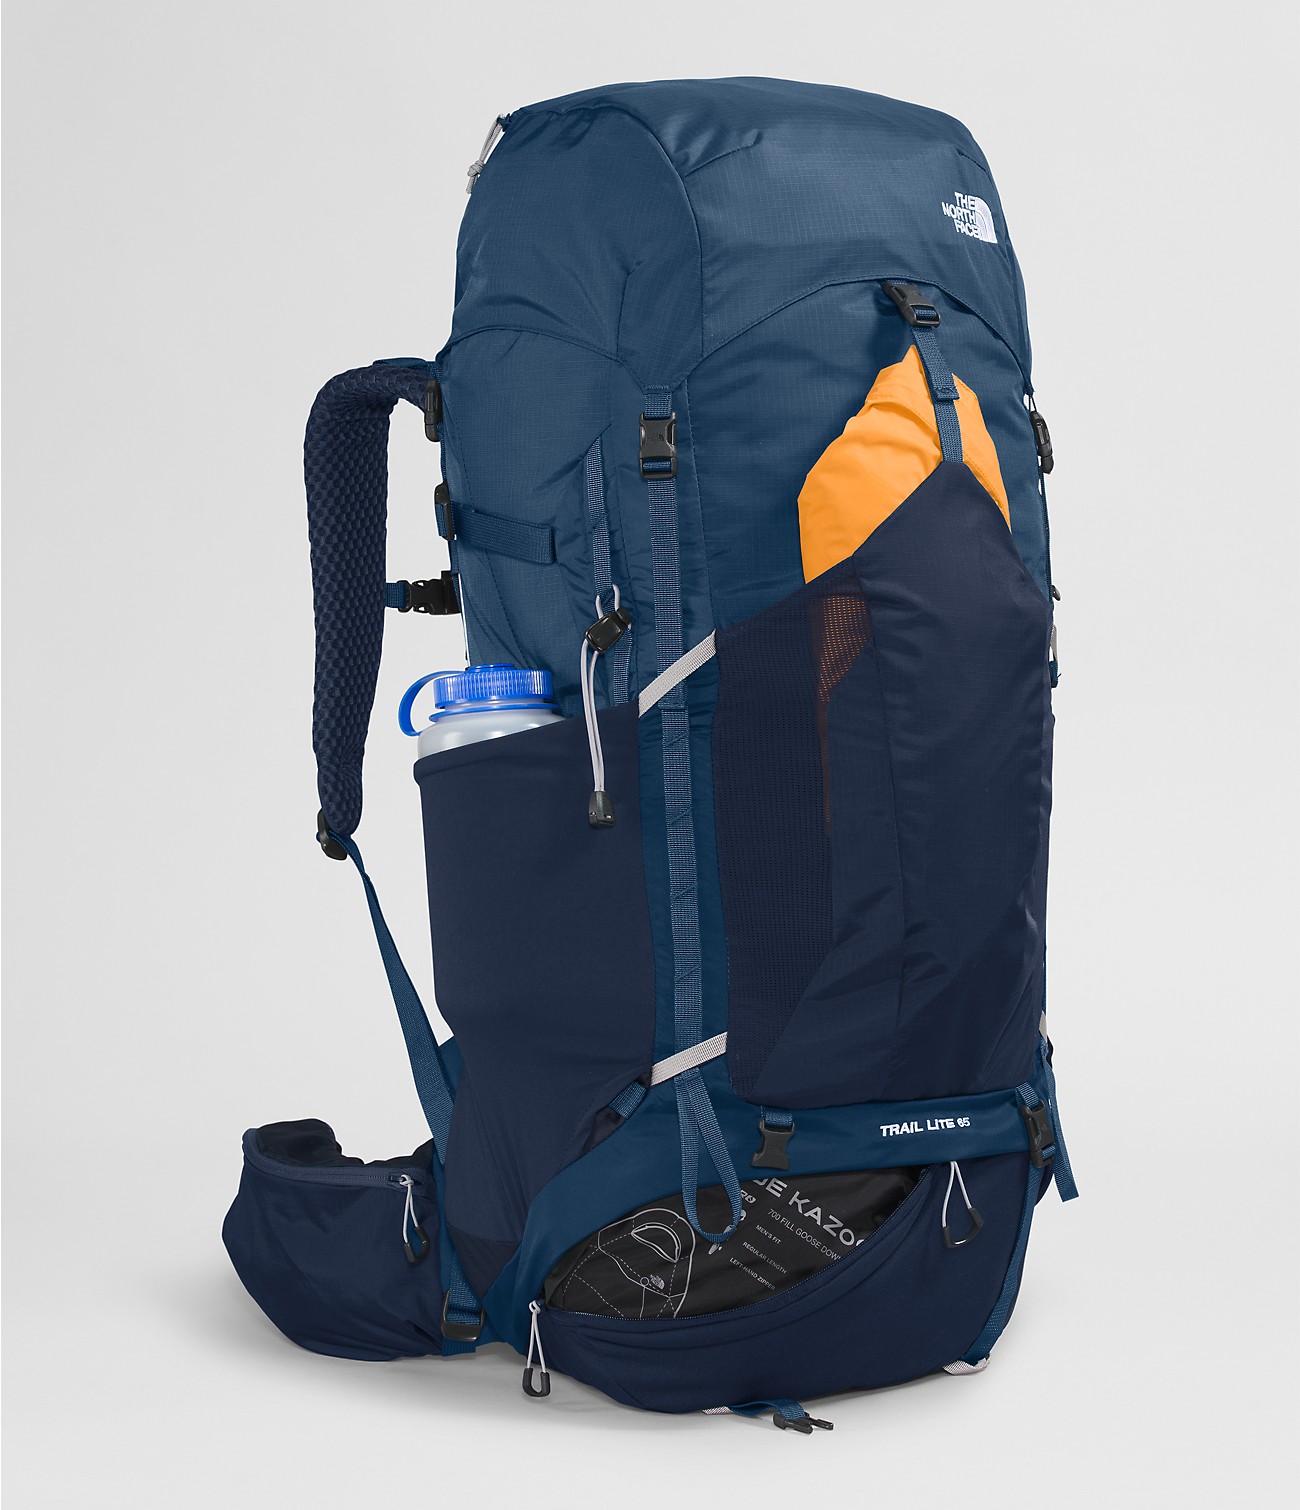 Trail Lite 65 Backpack | The North Face